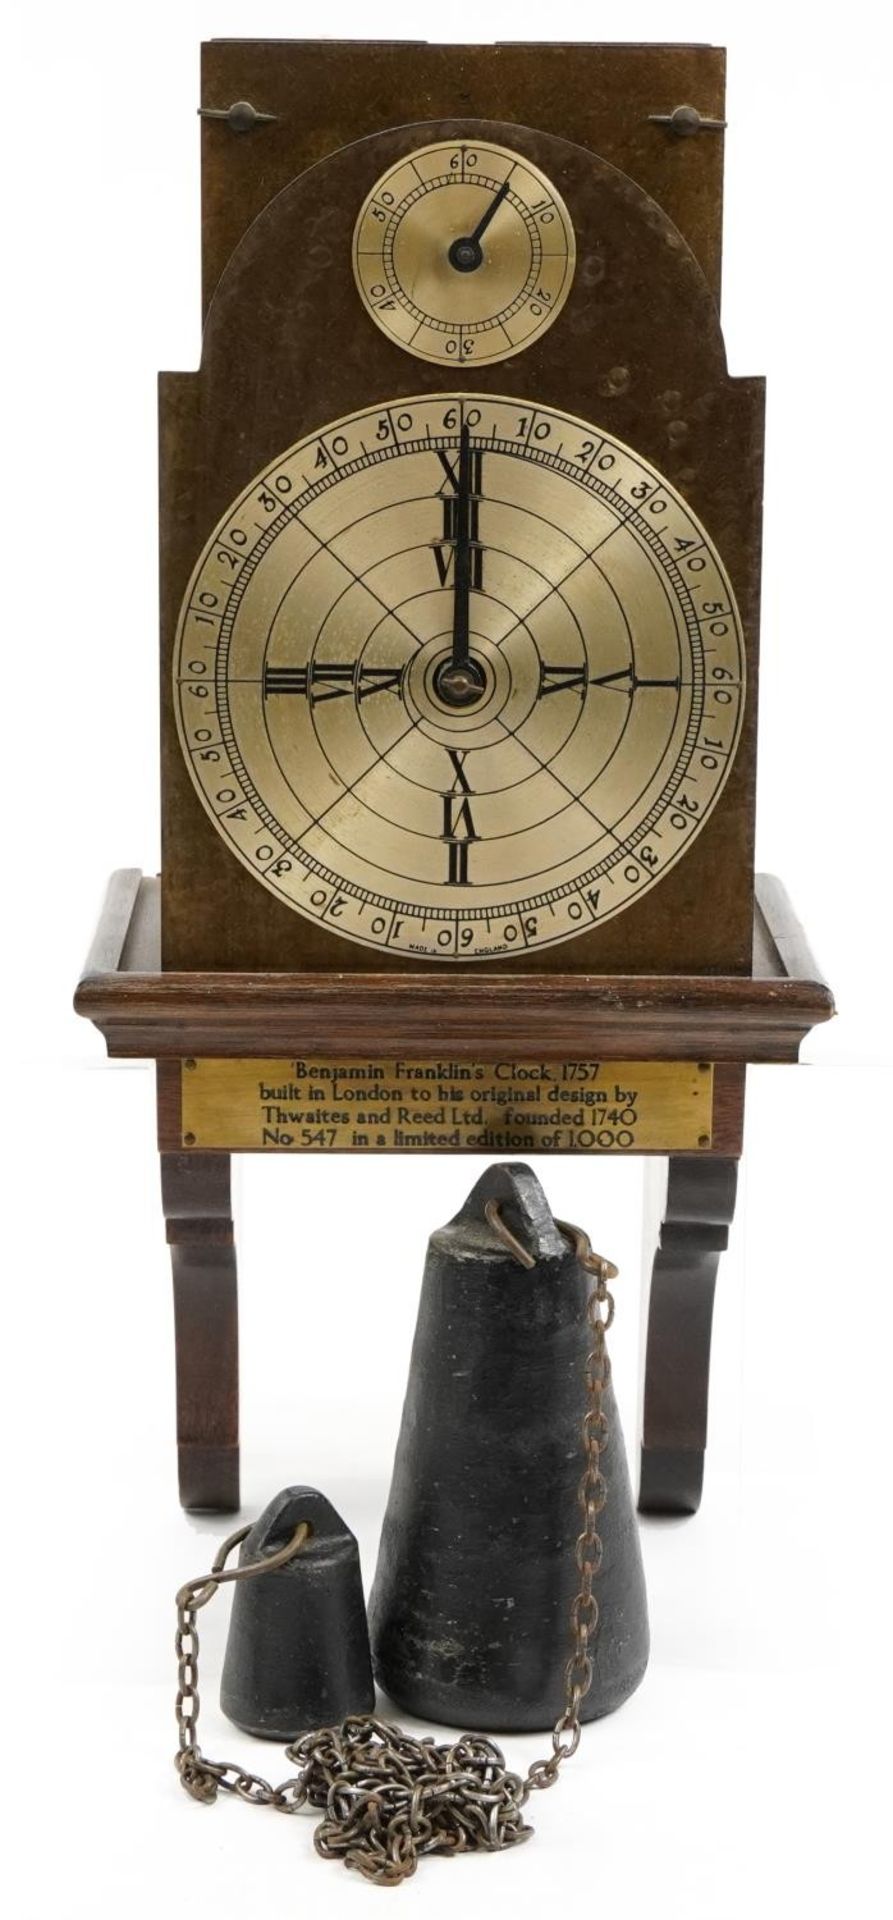 Replica model of Benjamin Franklin's wall clock built in London by Thwaites & Reed Ltd, limited - Image 2 of 7